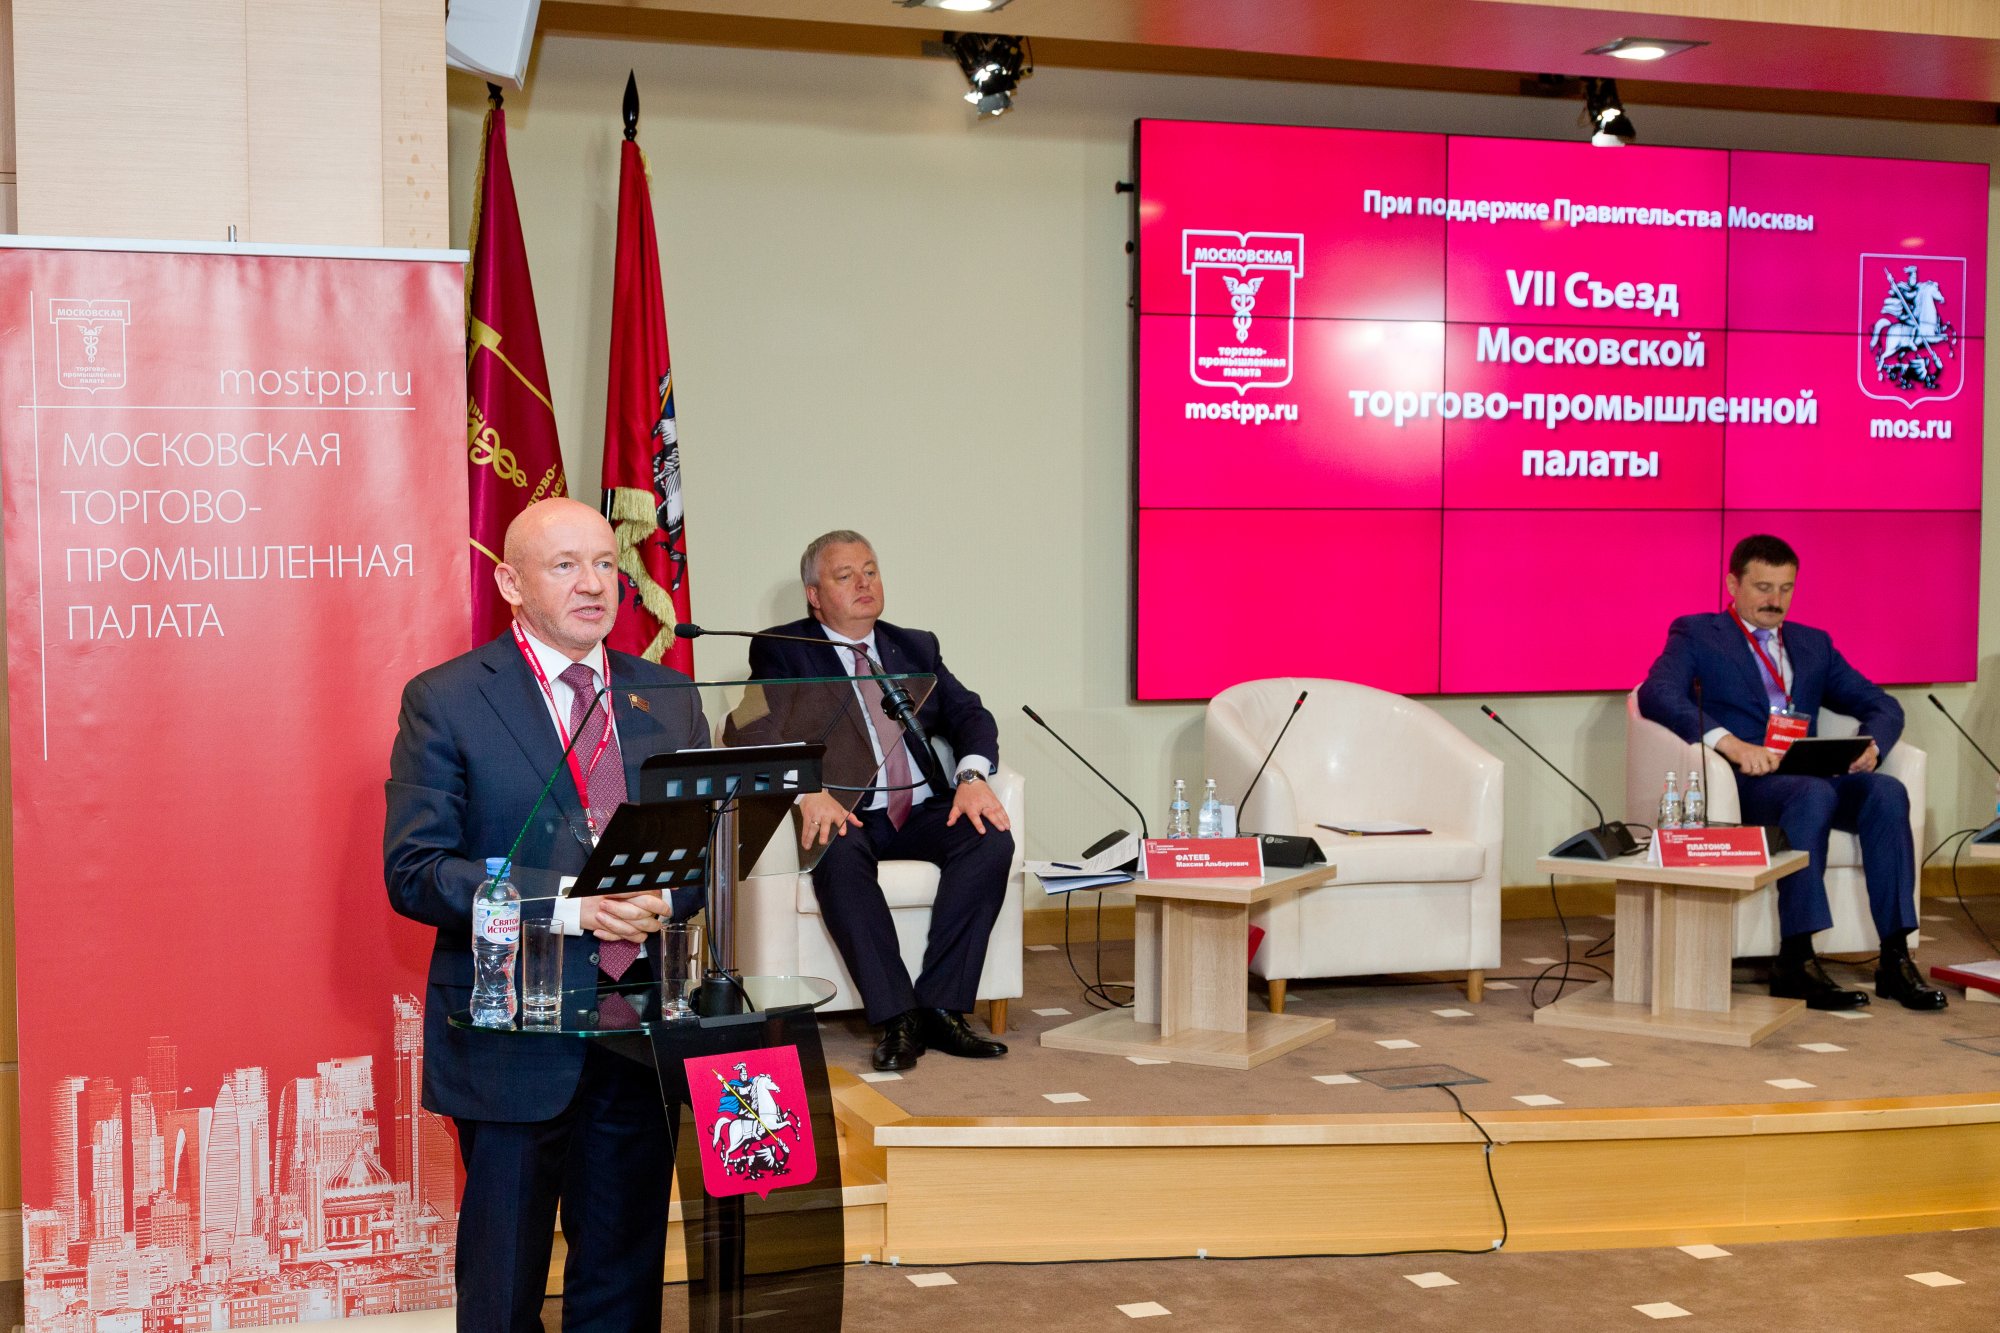 7th extraordinary Congress of the Moscow Chamber of Commerce and Industry was held